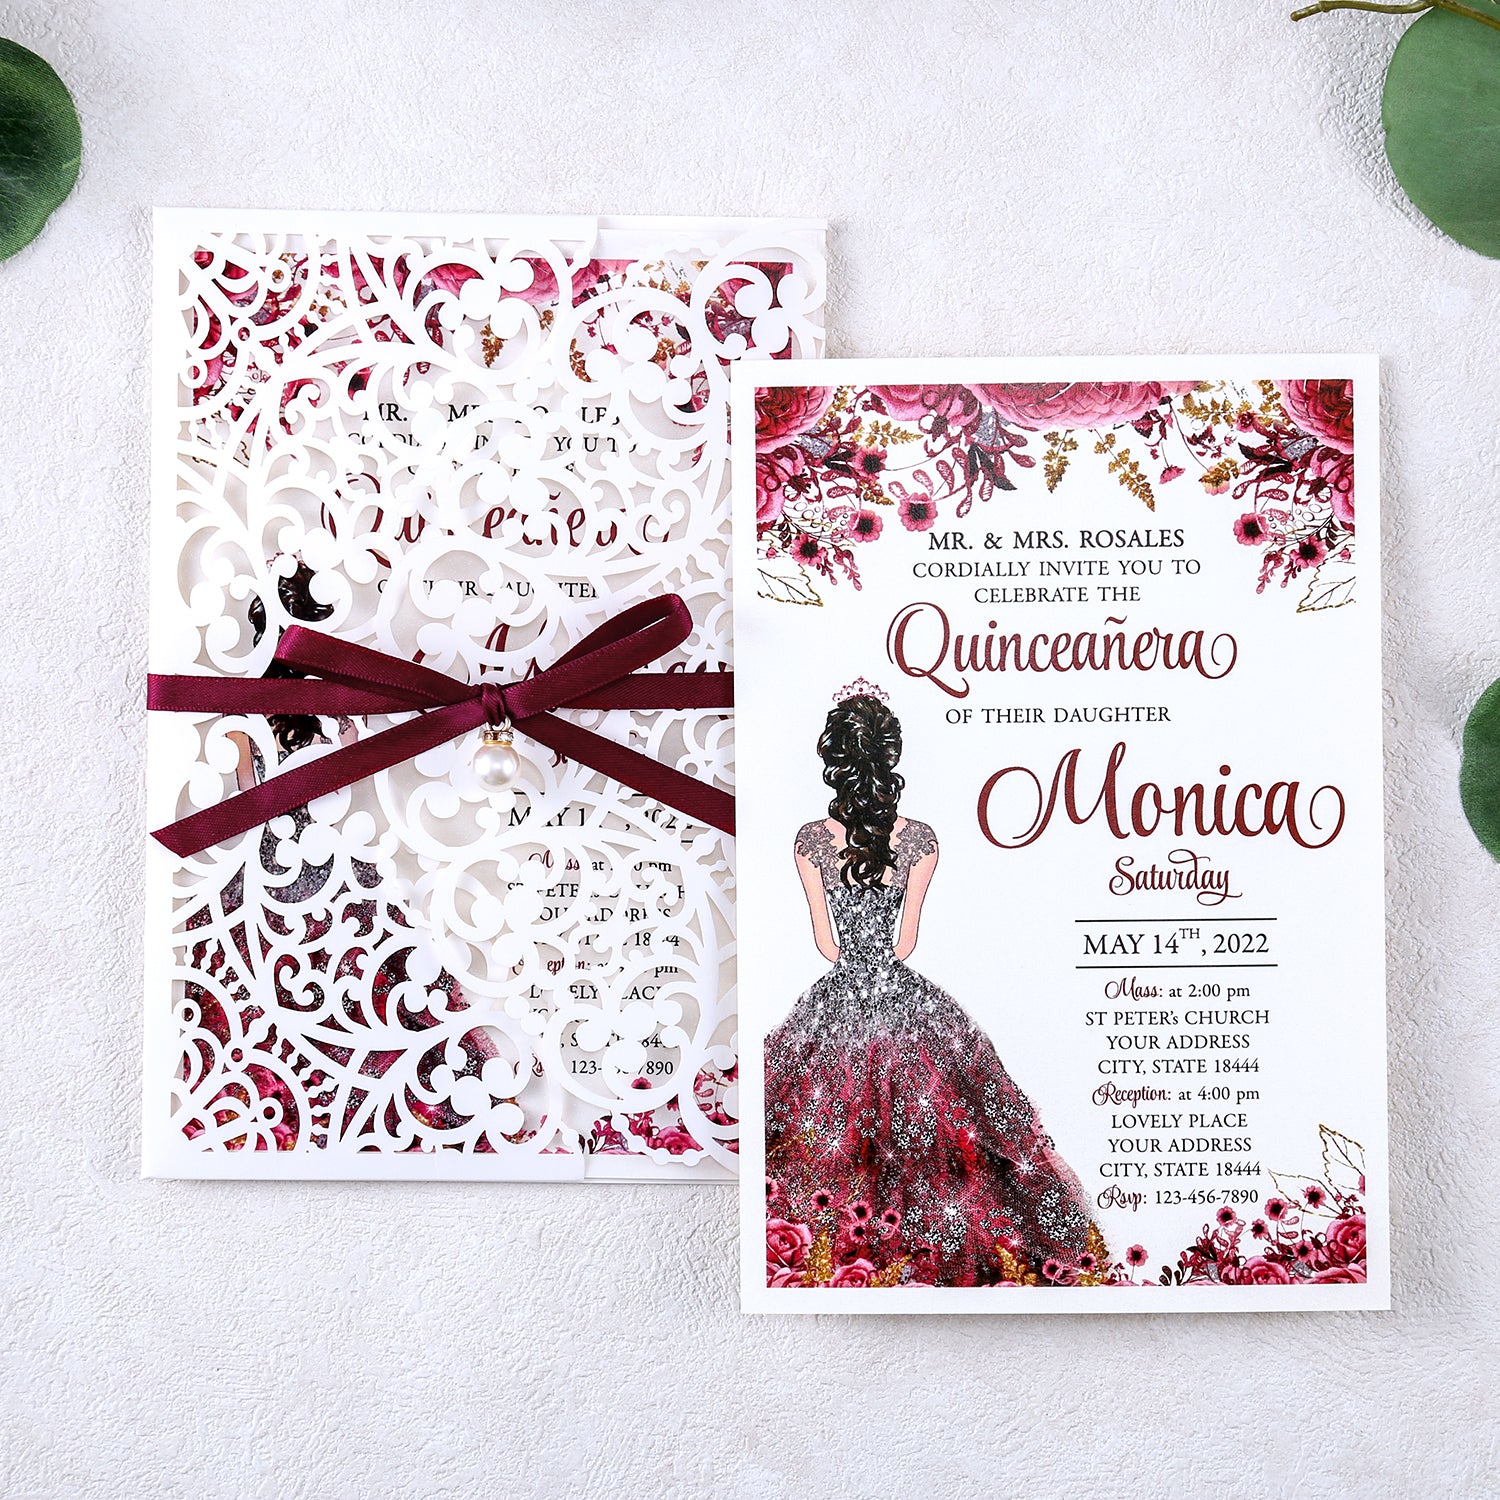 5 X 7.2" Laser Cut Hollow Rose Wedding invitations Cards With Burgundy Ribbon And Envelopes For Quinceanera Sweet 15 Invite - DorisHome